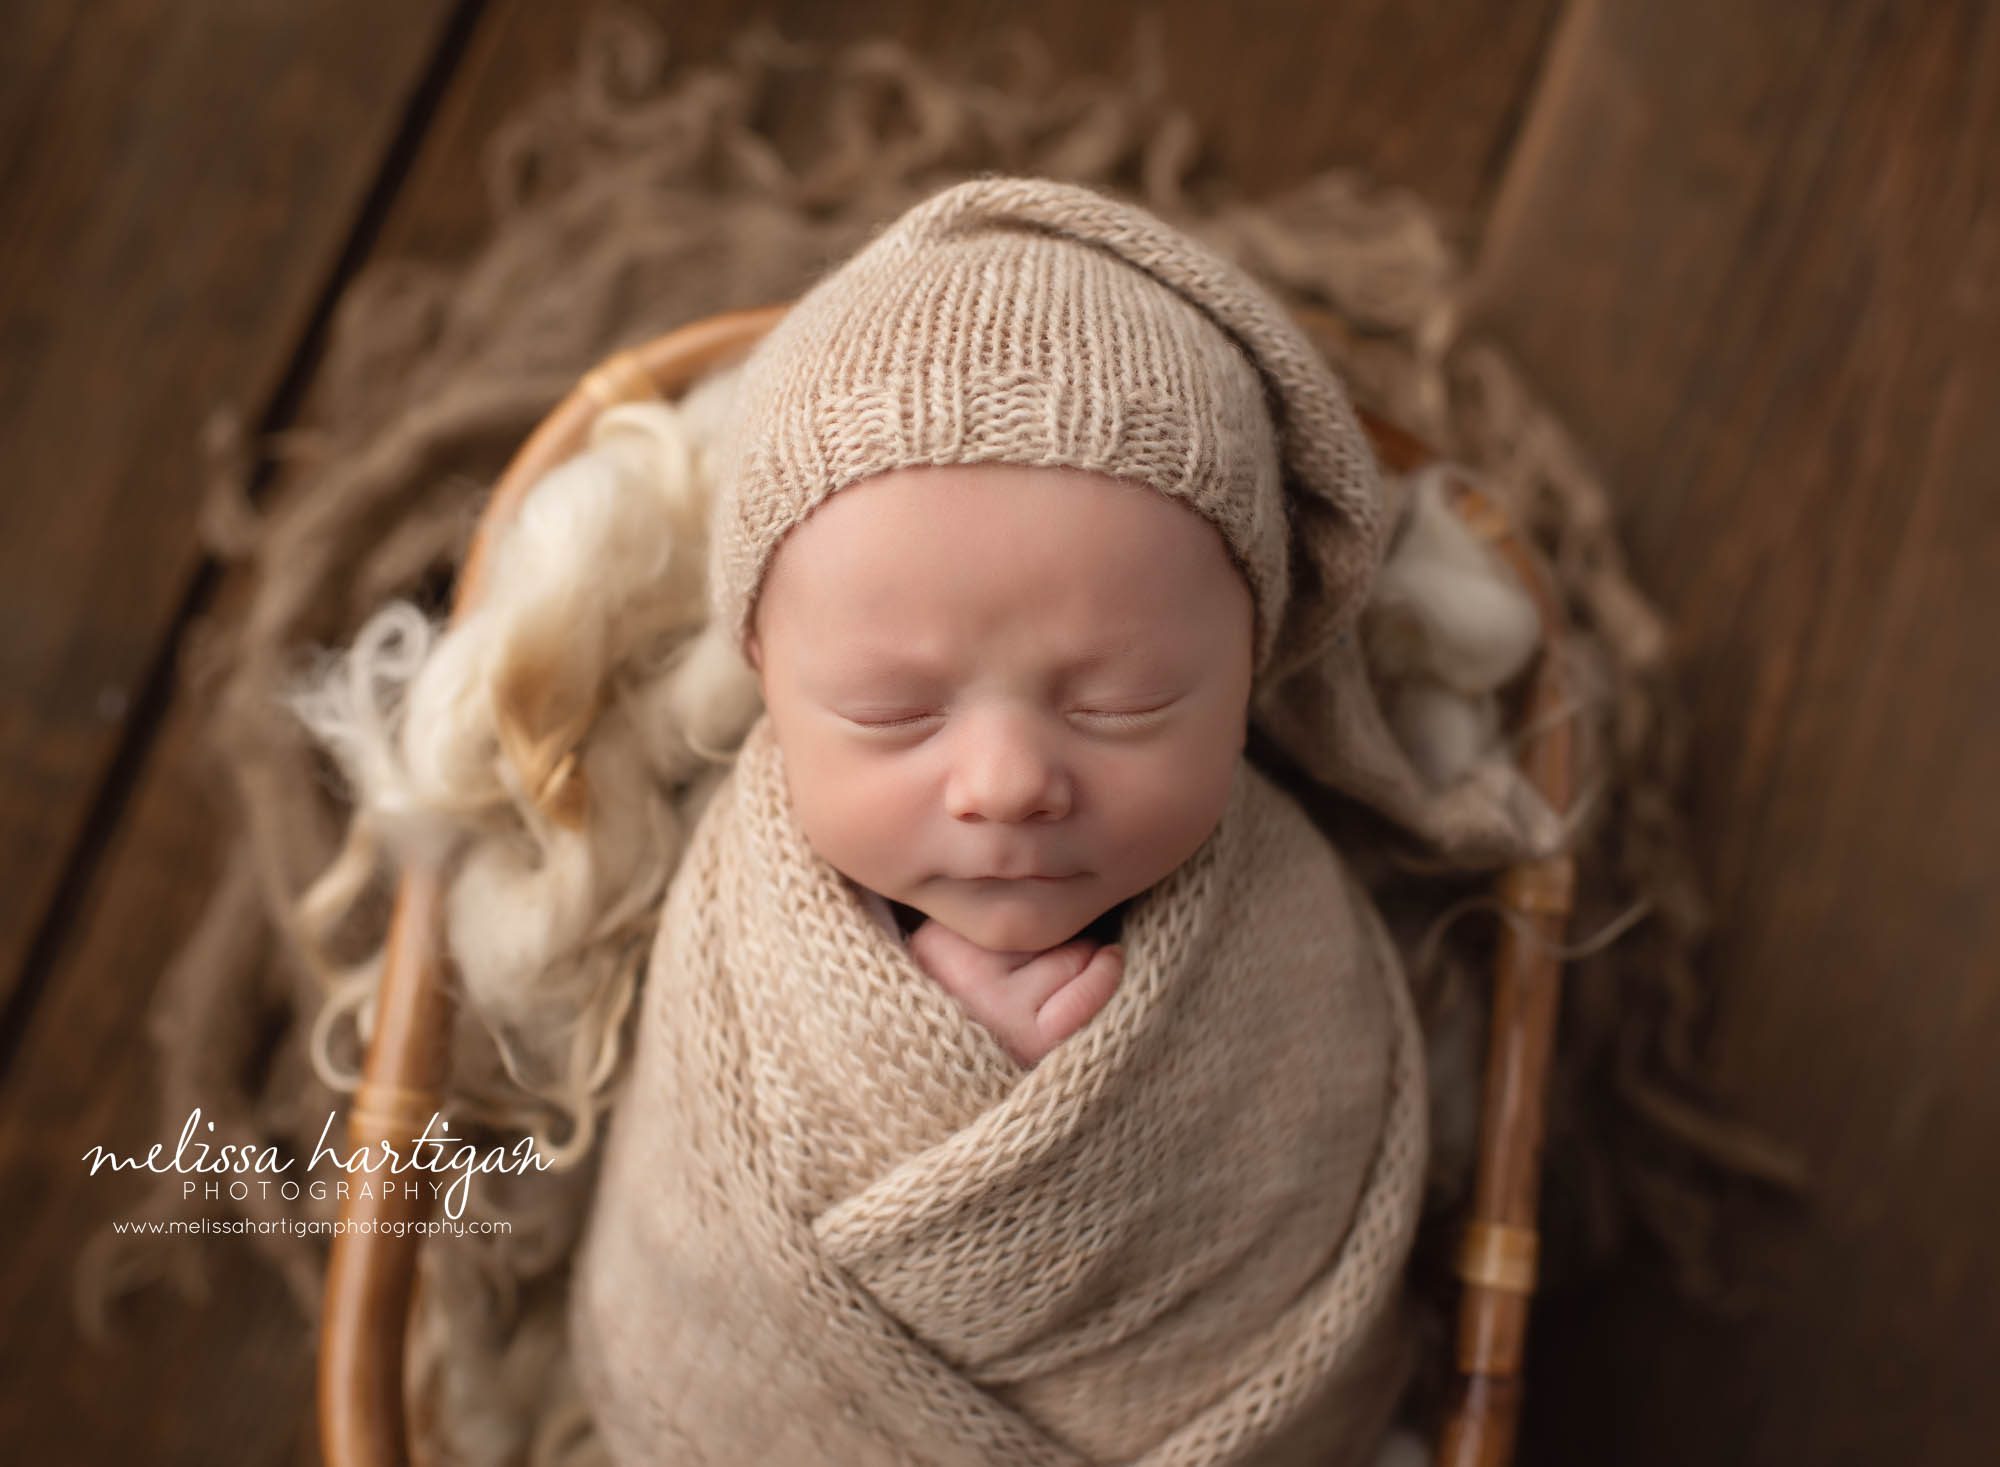 Baby boy wrapped in basket with cream layer and knitted sleepy cap